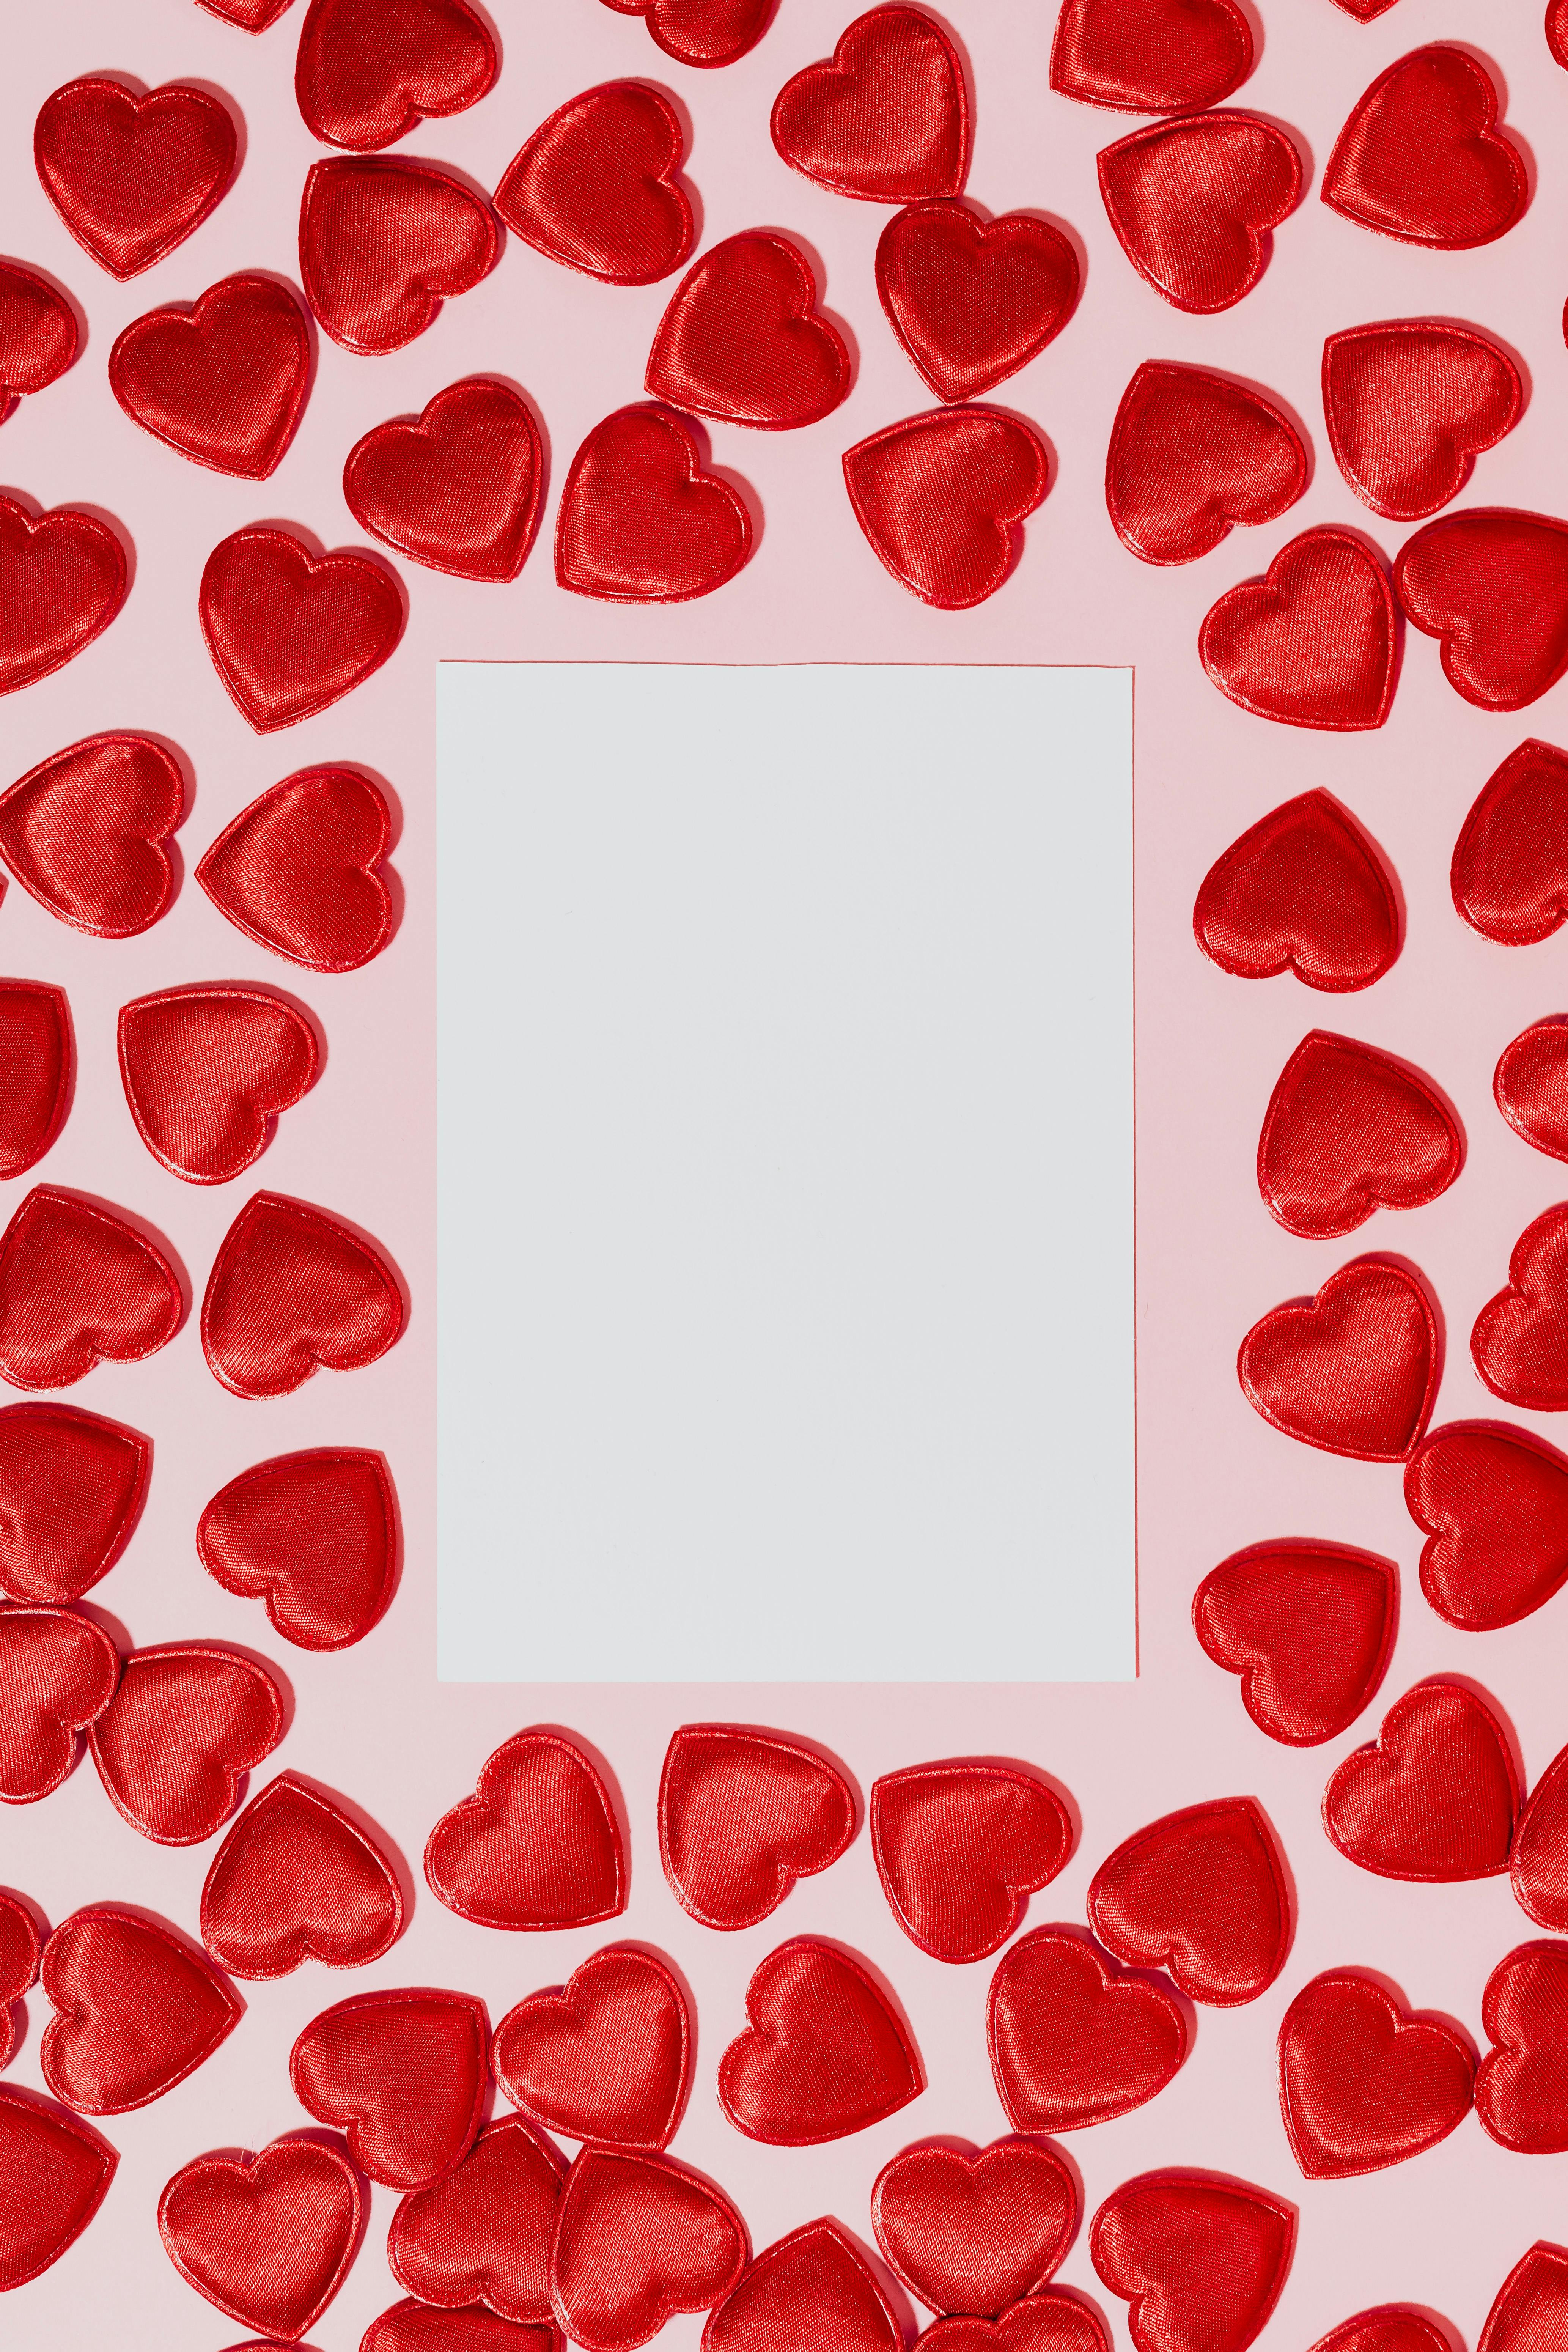 Free and customizable wallpaper heart templates